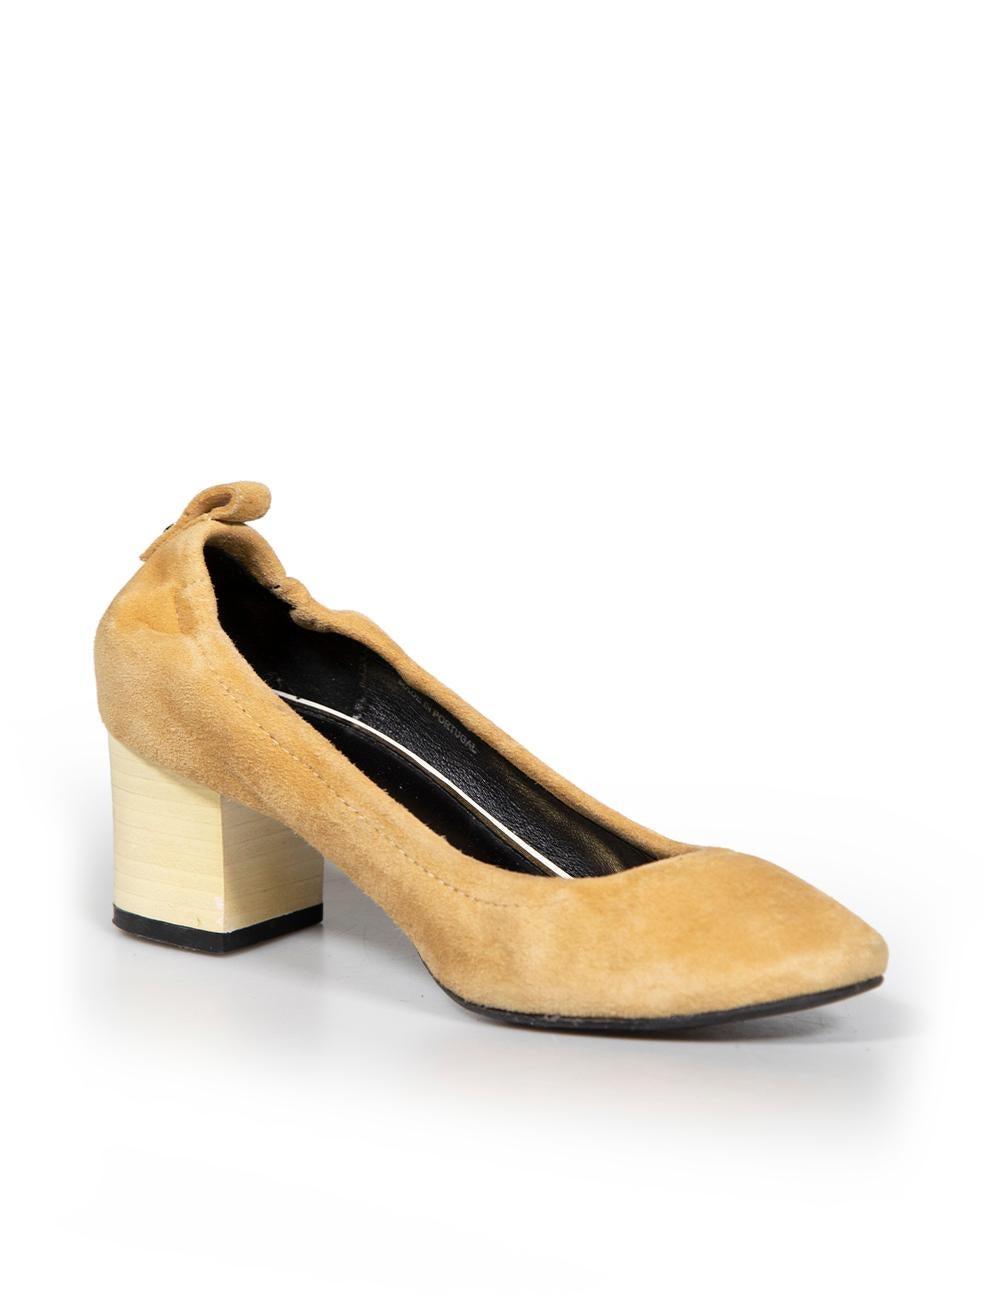 CONDITION is Good. Minor wear to pumps is evident. Slight discolouration to suede on the top of right toe. Light abrasions to suede toe and soles on this used Lanvin designer resale item.
 
 
 
 Details
 
 
 Camel
 
 Suede
 
 Slip on pumps
 
 Round